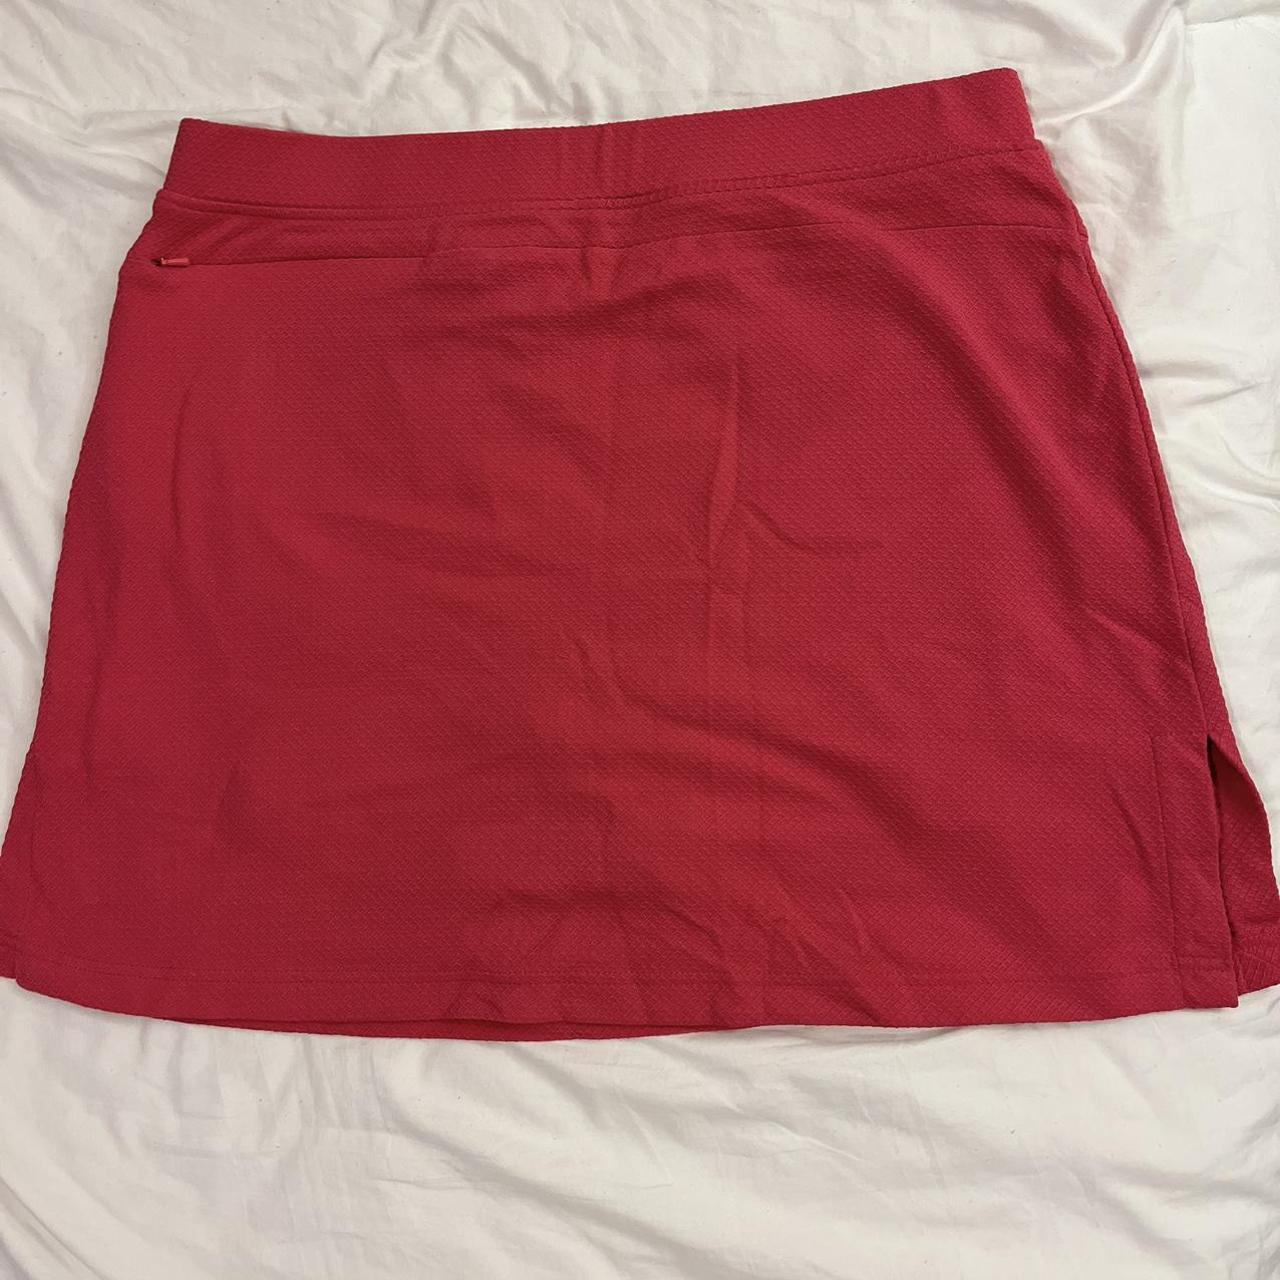 American Vintage Women's Pink and White Skirt (3)